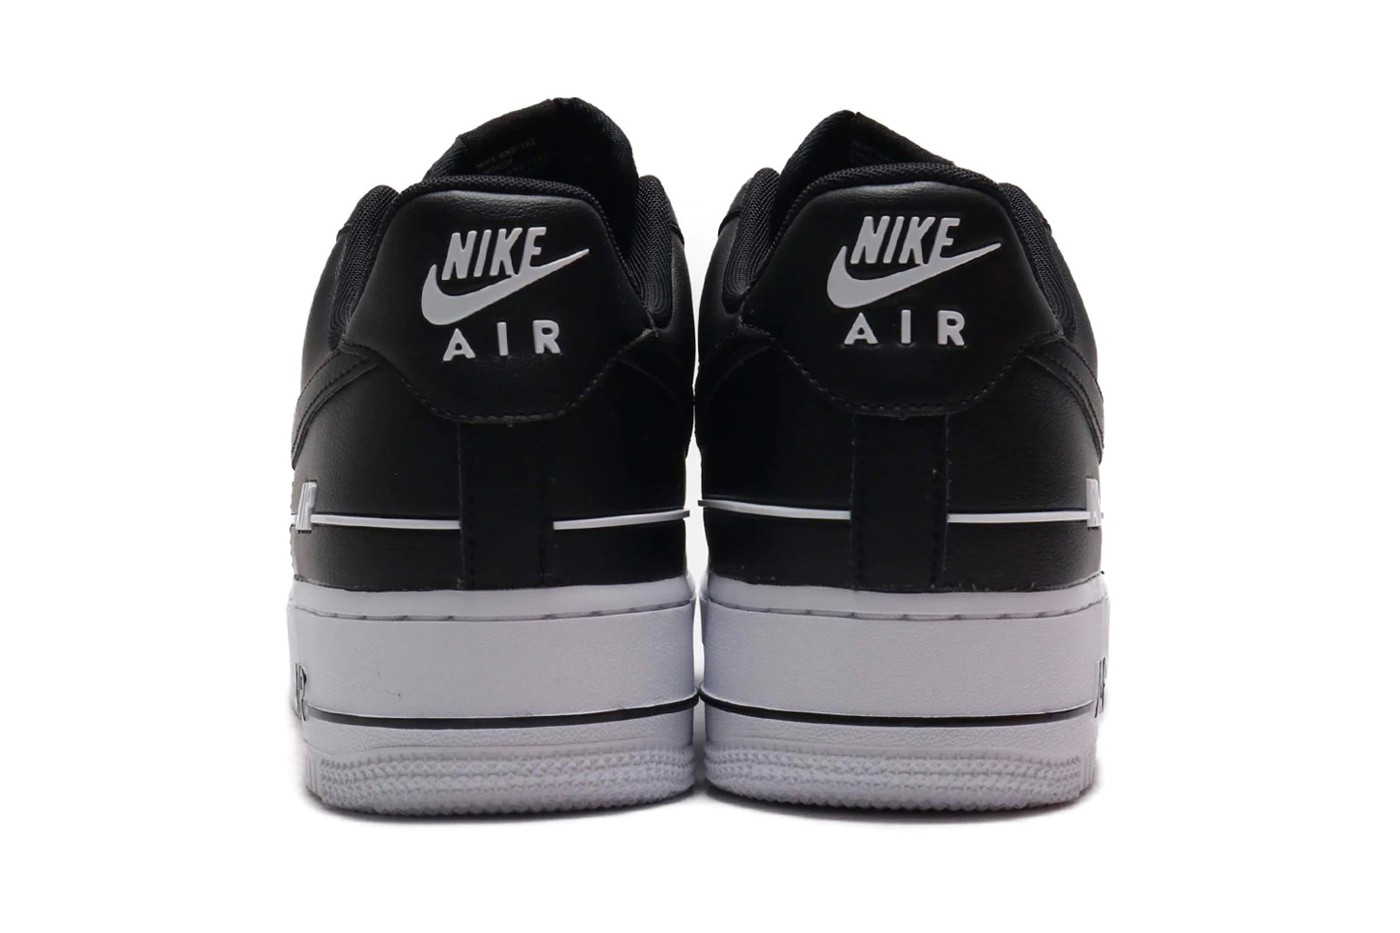 Nike Air Force 1 07 LV8 3 Peace Love Swoosh shoes 